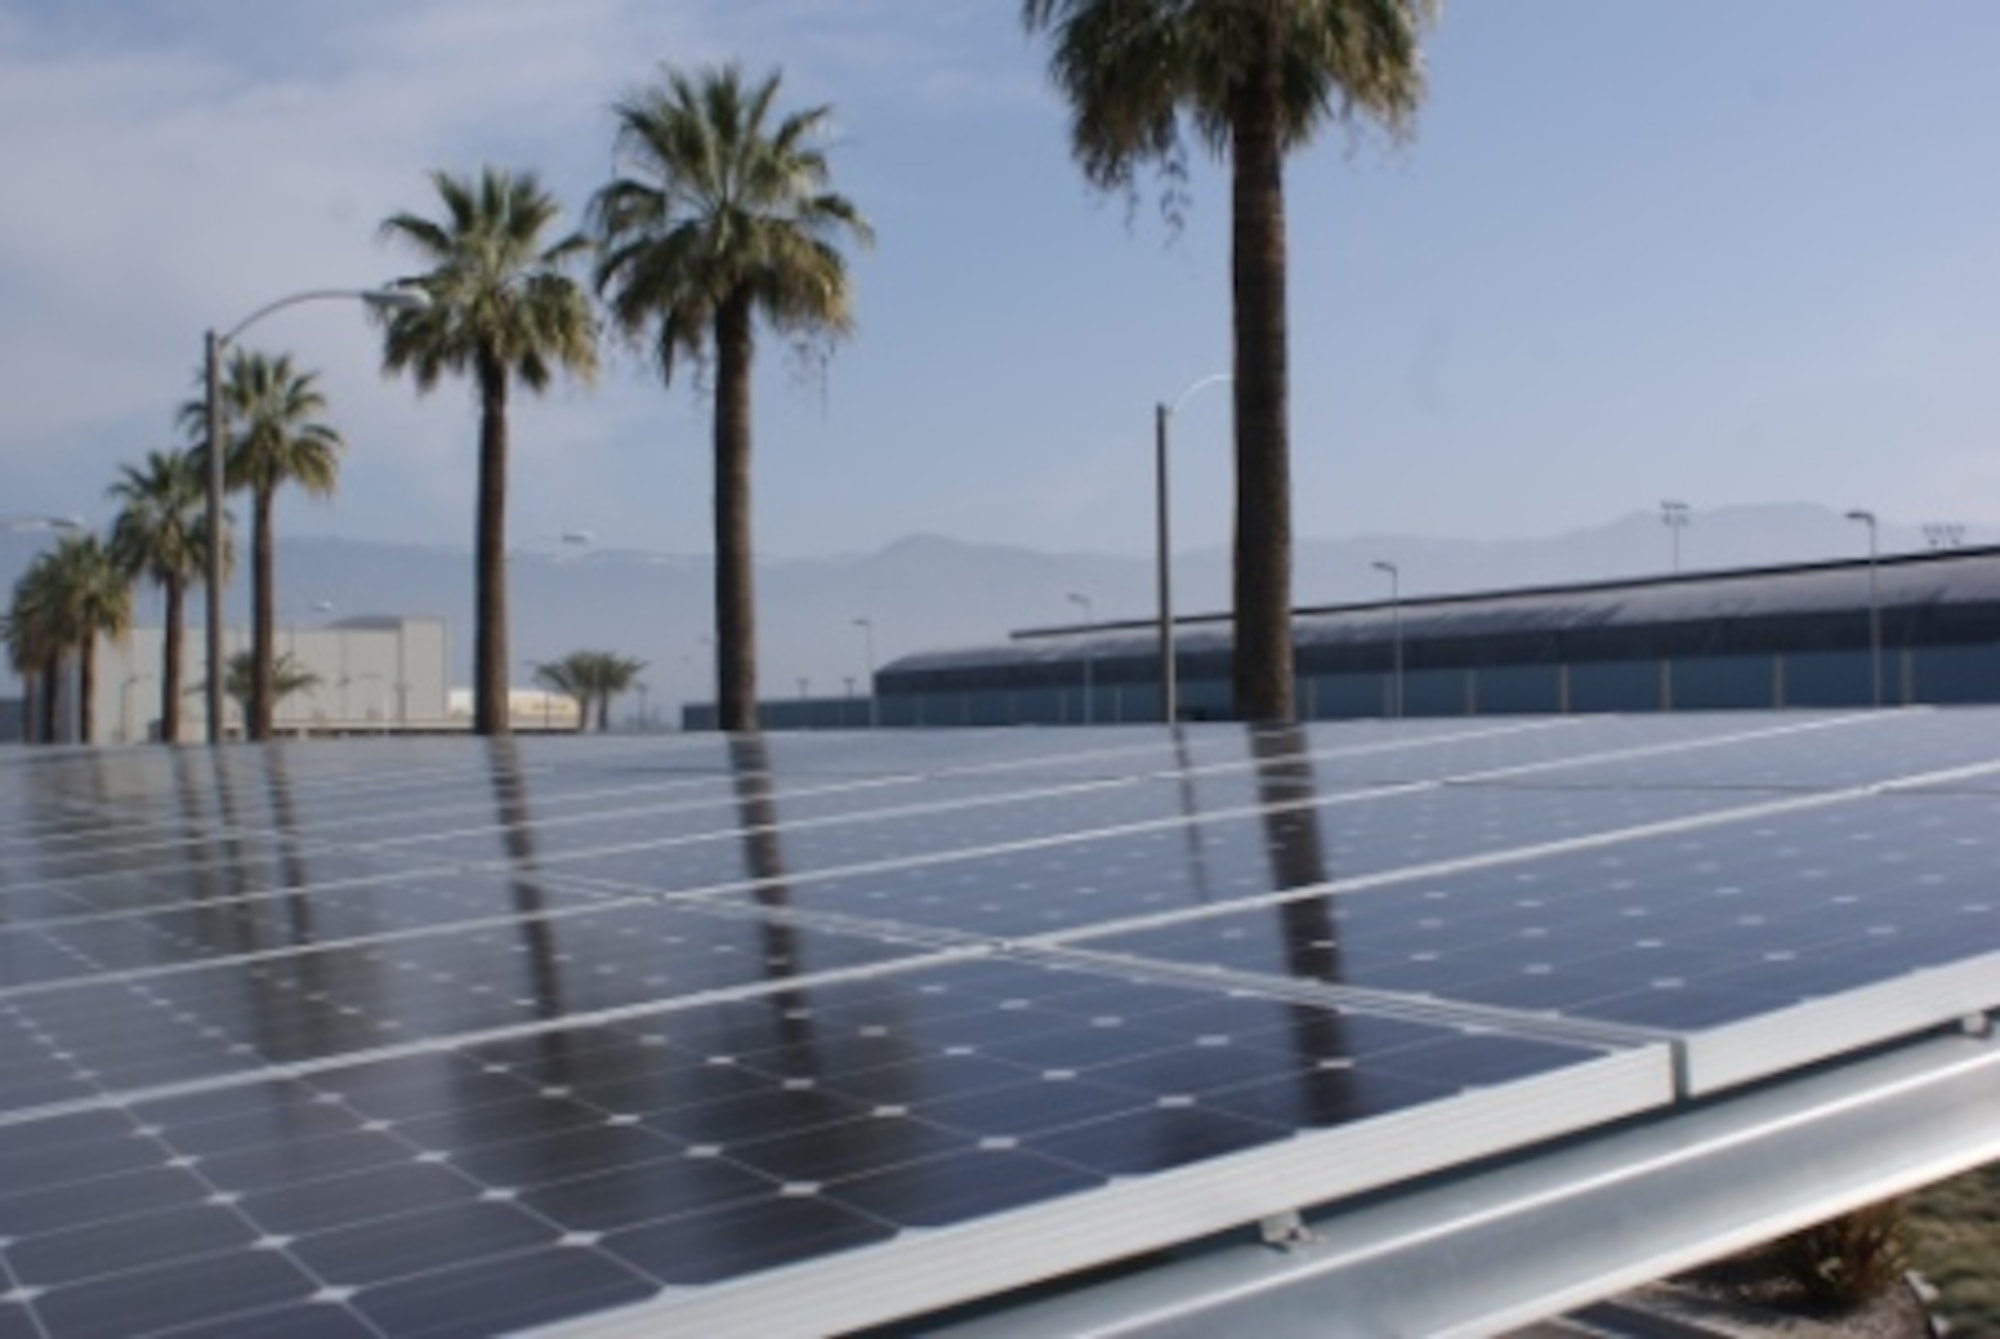 San Bernardino International Airport, located on the former Norton AFB, installed a solar parking lot that generated enough energy to offset utility bills at the airport terminal. [Photos courtesy of Inland Valley Development Agency]
